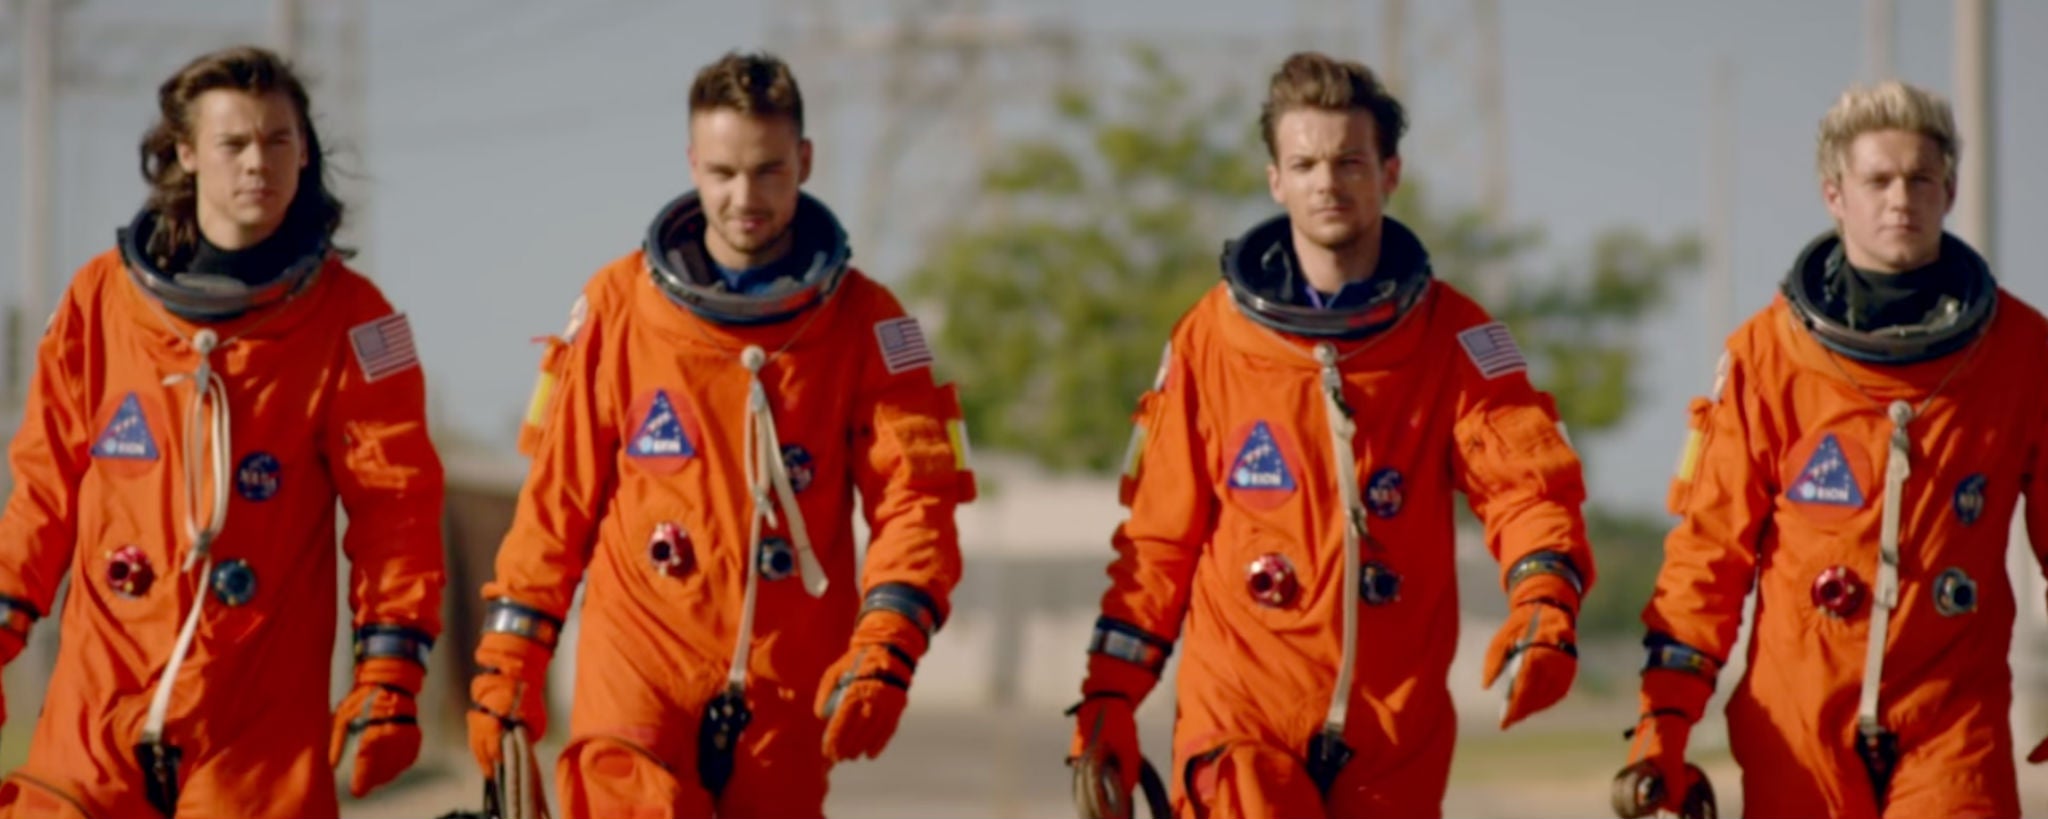 One Direction, minus Zayn Malik, don NASA spacesuits and board a rocket in the 'Drag Me Down' music video